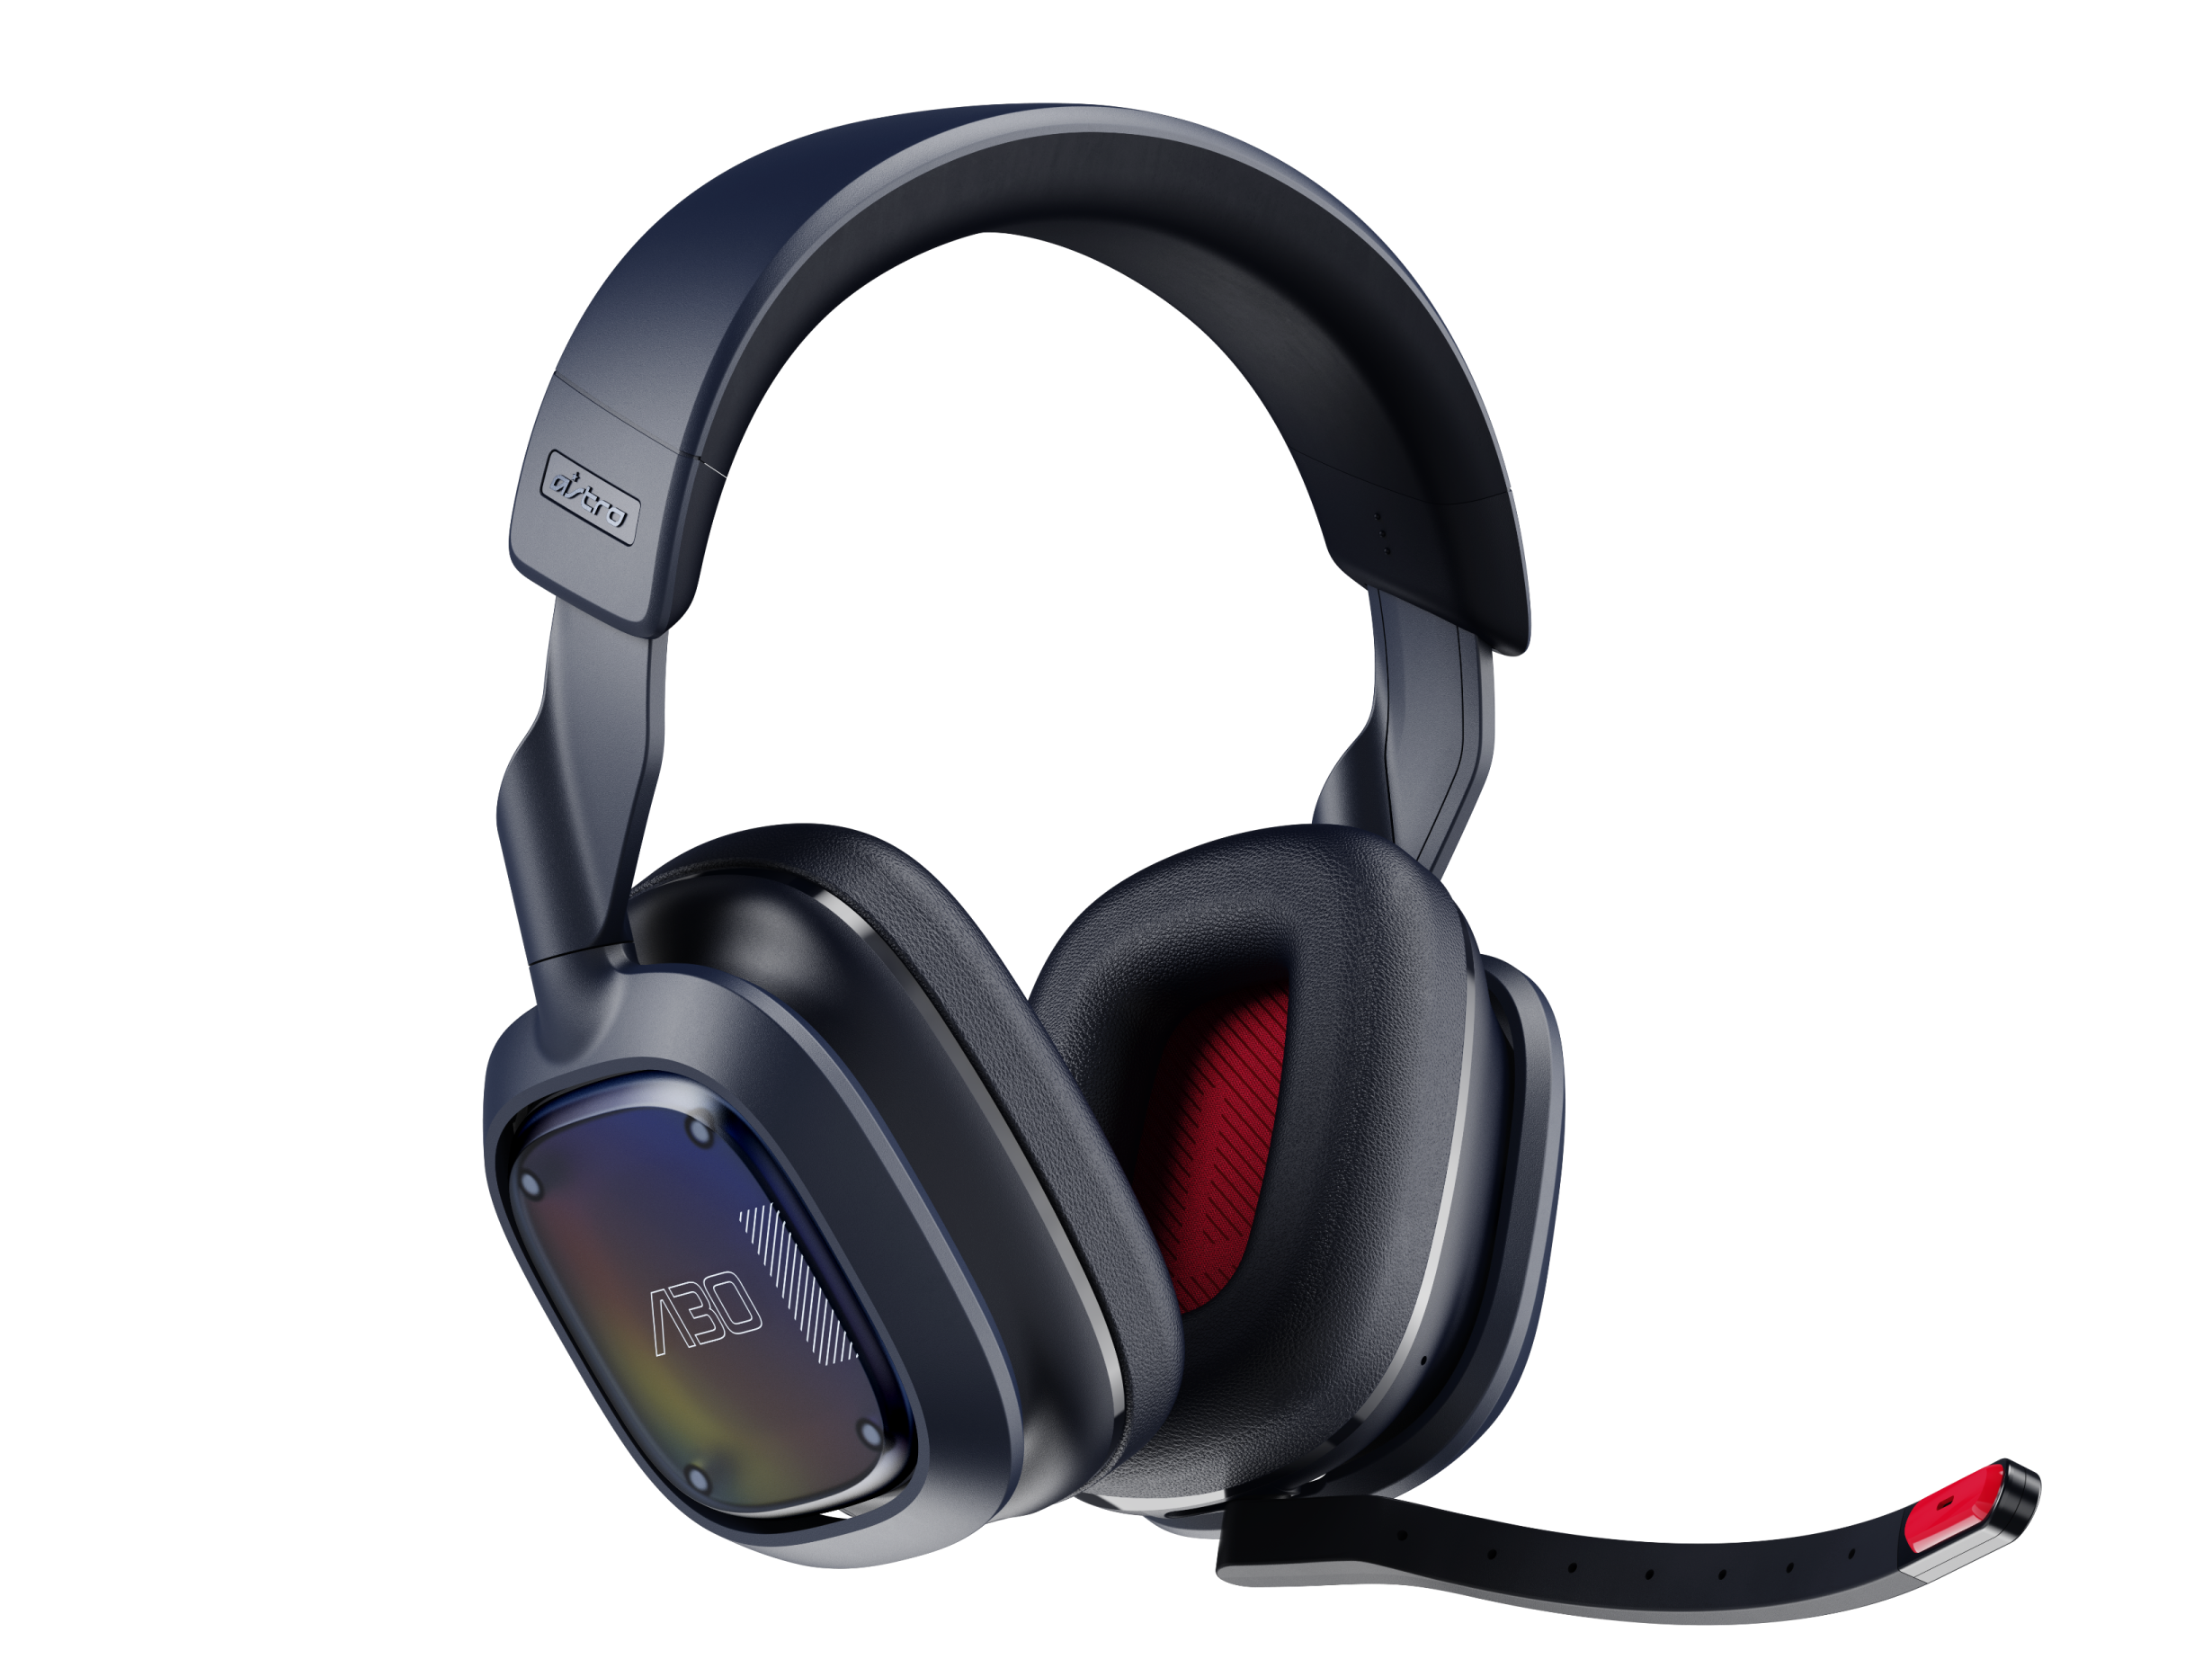 Astro A30 Wireless Gaming Headset Review - PowerUp!